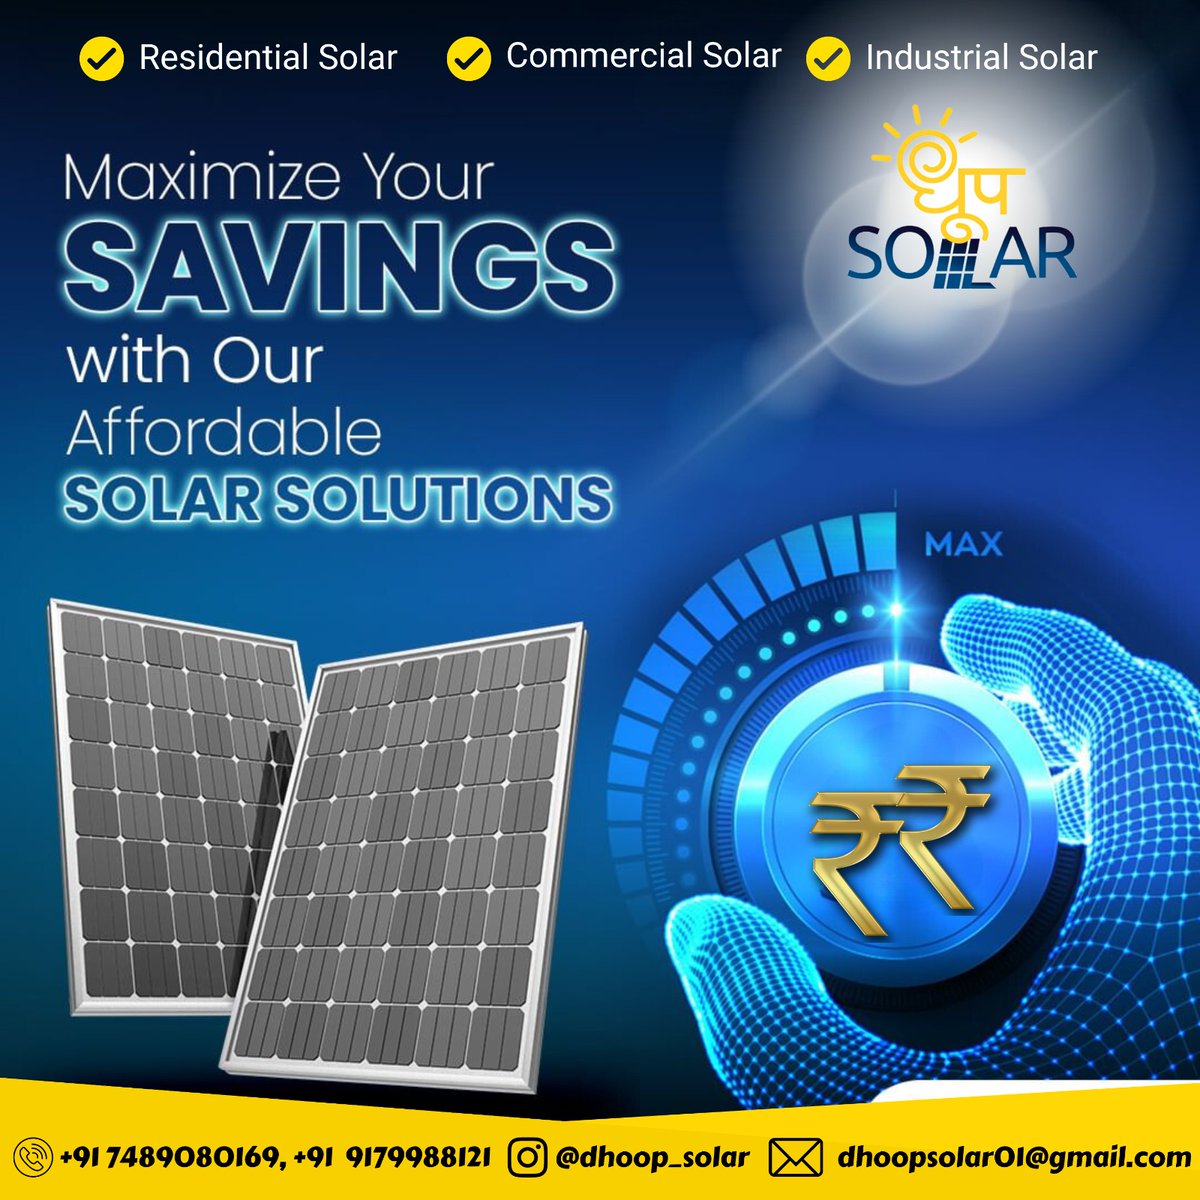 Maximize your savings with our affordable solar solutions! 

☀️💰 Discover how Dhoop Solar can help you cut costs and embrace sustainable living. 

Start saving today! 
.
.
.
Contact Us : +91 74890 80169
Gmail :- dhoopsolar01@gmail.com
.
.
.
#MaximizeSavings #AffordableSolar